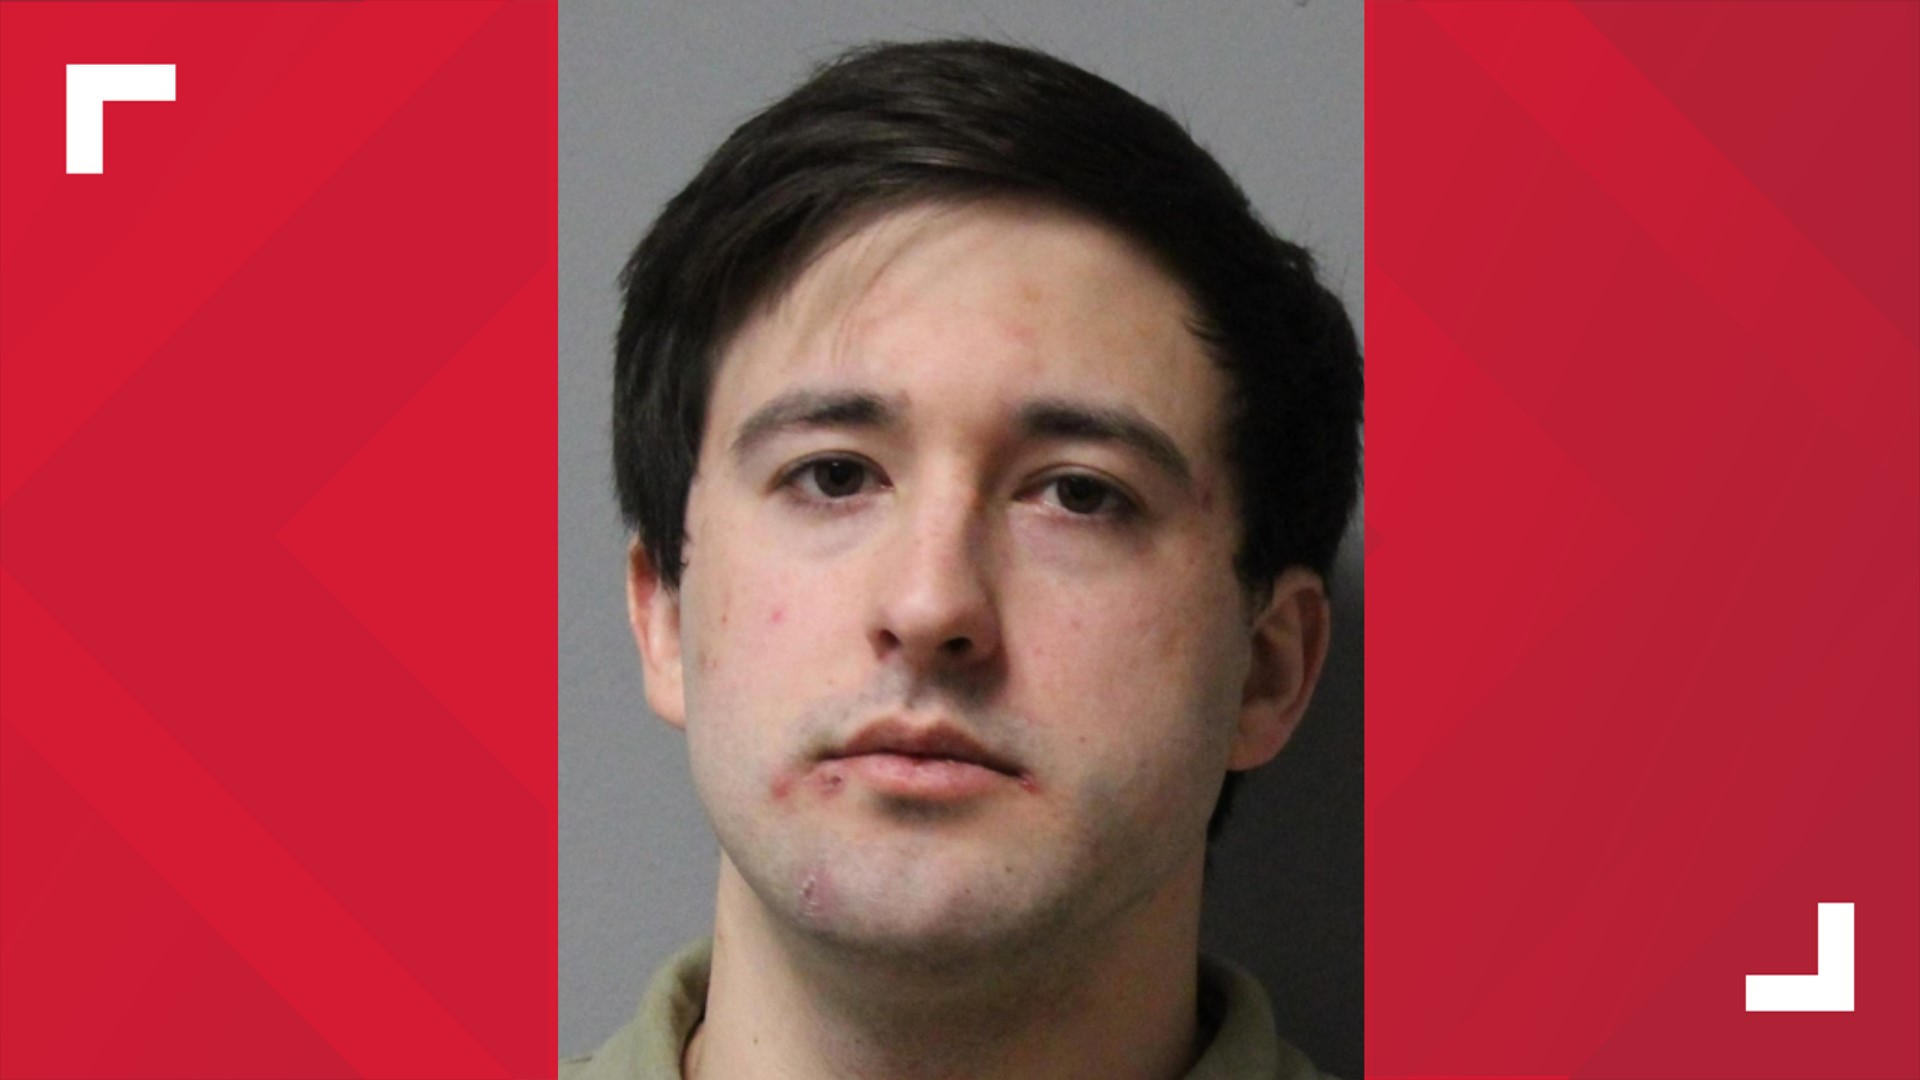 The son of a co-founder of Buc-ee's is facing 28 felony charges. He's accused of hiding cameras in his homes and recording people without their consent.